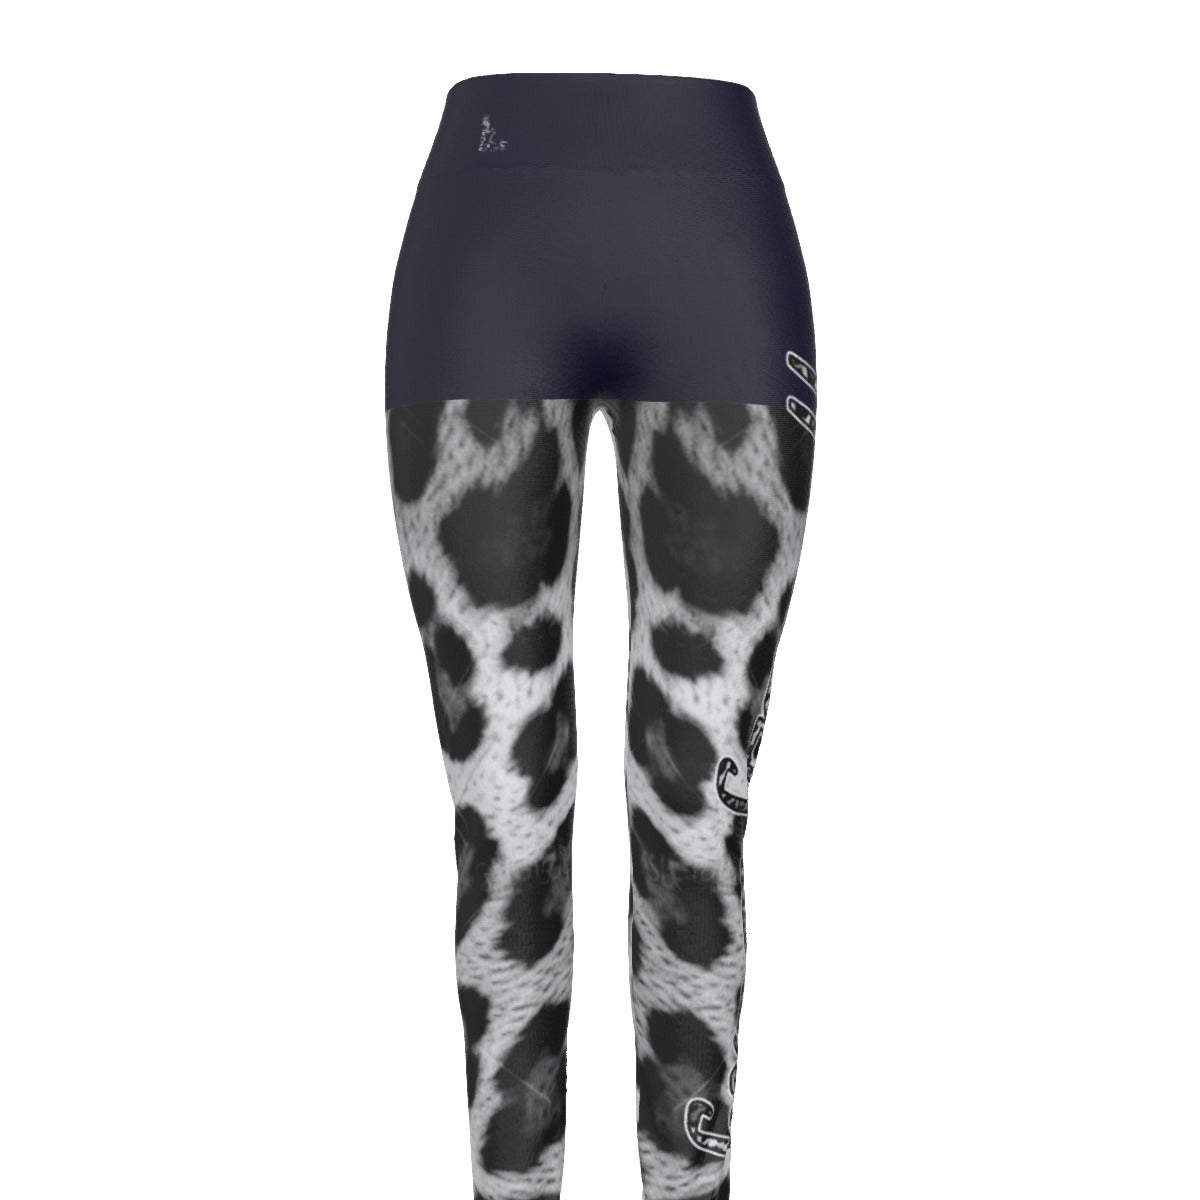 Officially Sexy Snow Leopard Print Collection Women's Black High Waist Booty Popper Leggings #2 (English) 1